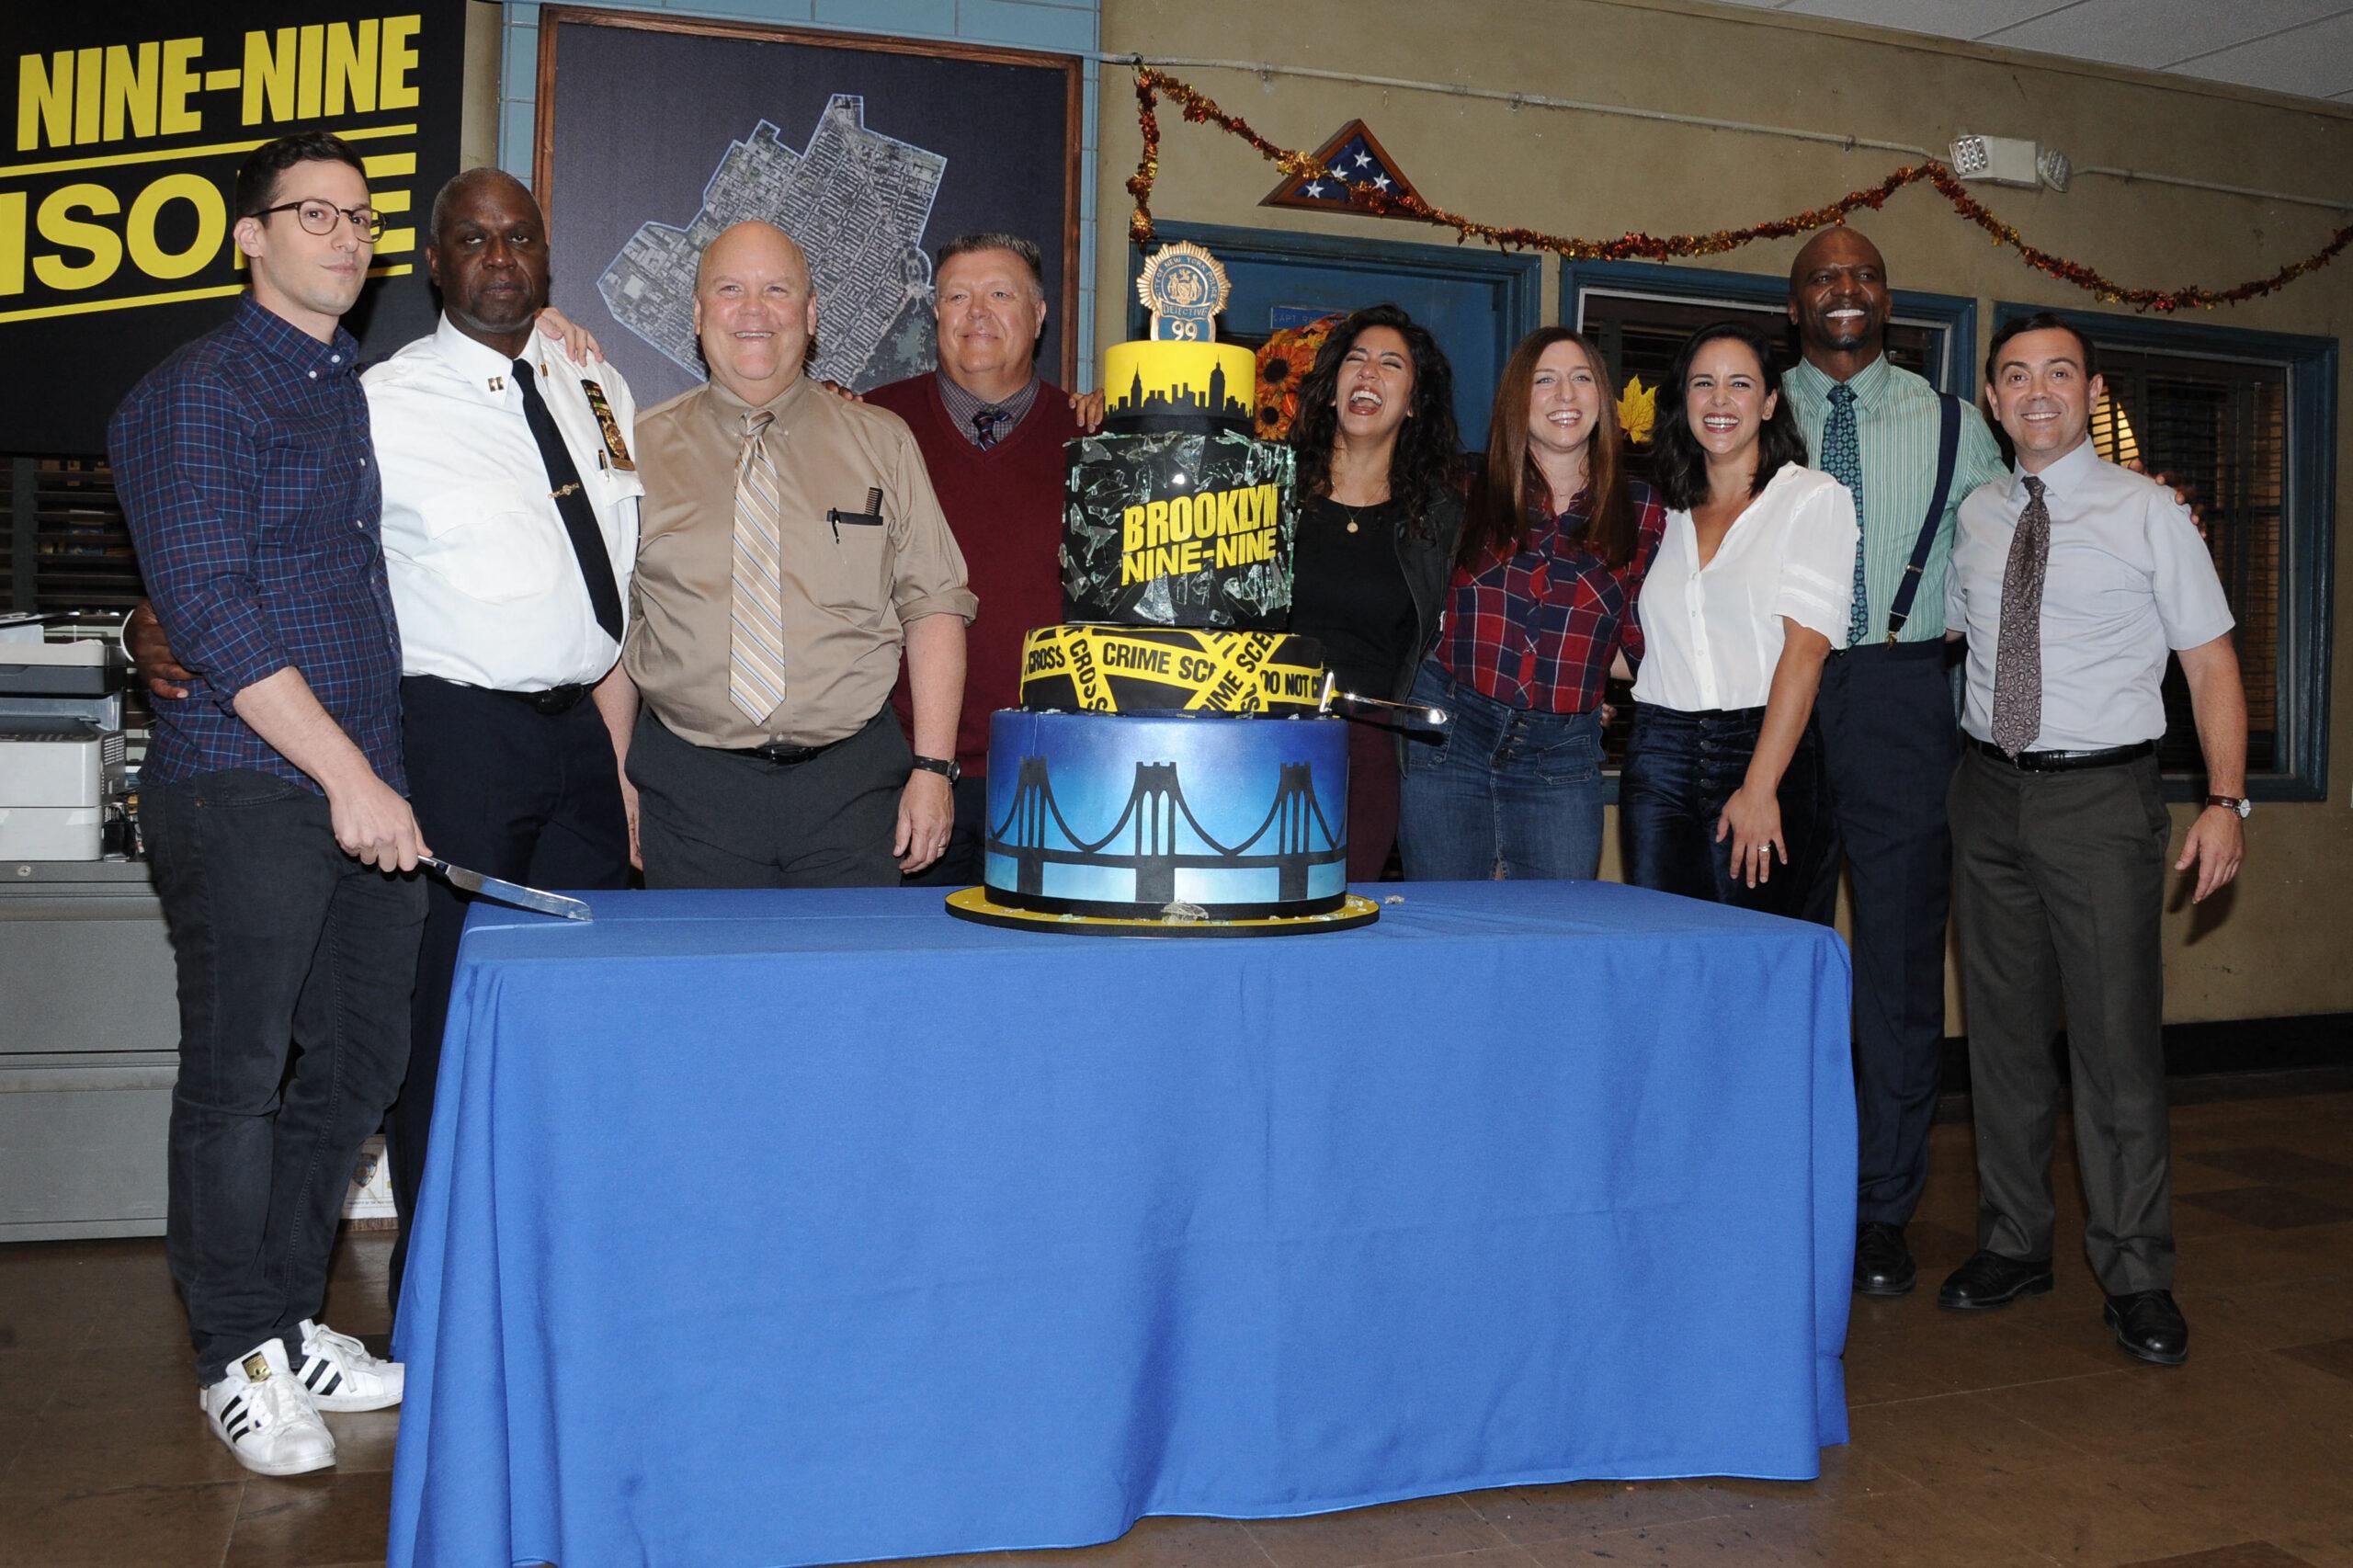 The BROOKLYN NINE-NINE 99th Episode Cake Cutting Party